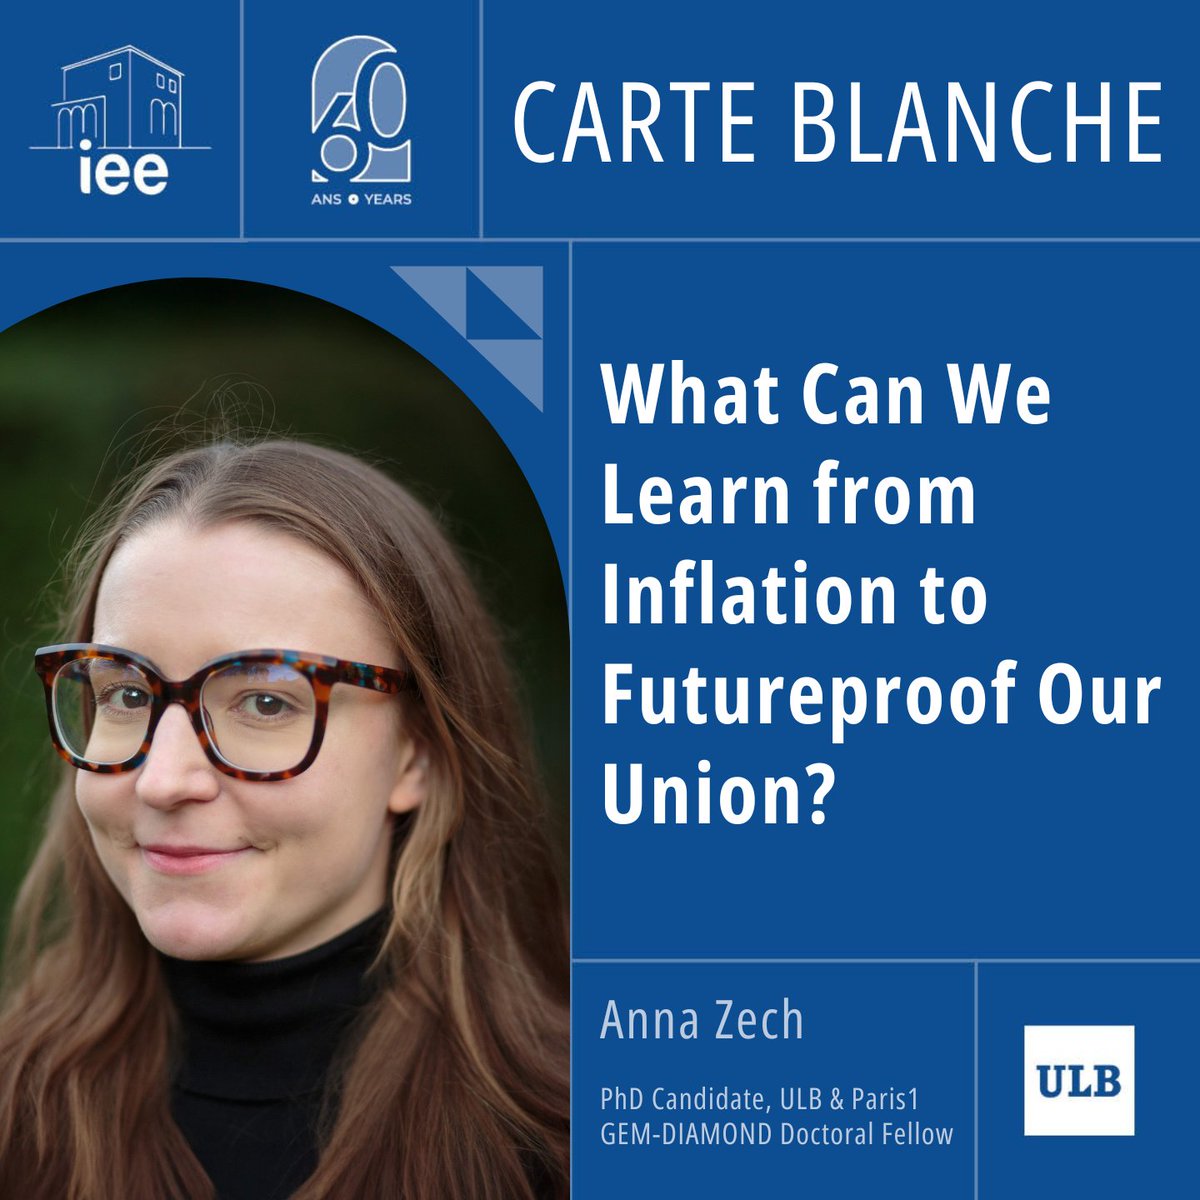 📝 Our series of cartes blanches, published to mark the sixtieth anniversary of the IEE-ULB, continues this week with an article by Anna Zech, a GEM-DIAMOND Doctoral Fellow and PhD candidate at ULB and Paris1. Read the article👉bit.ly/3TzzcaA #IEE60 @AnnaSophieZech